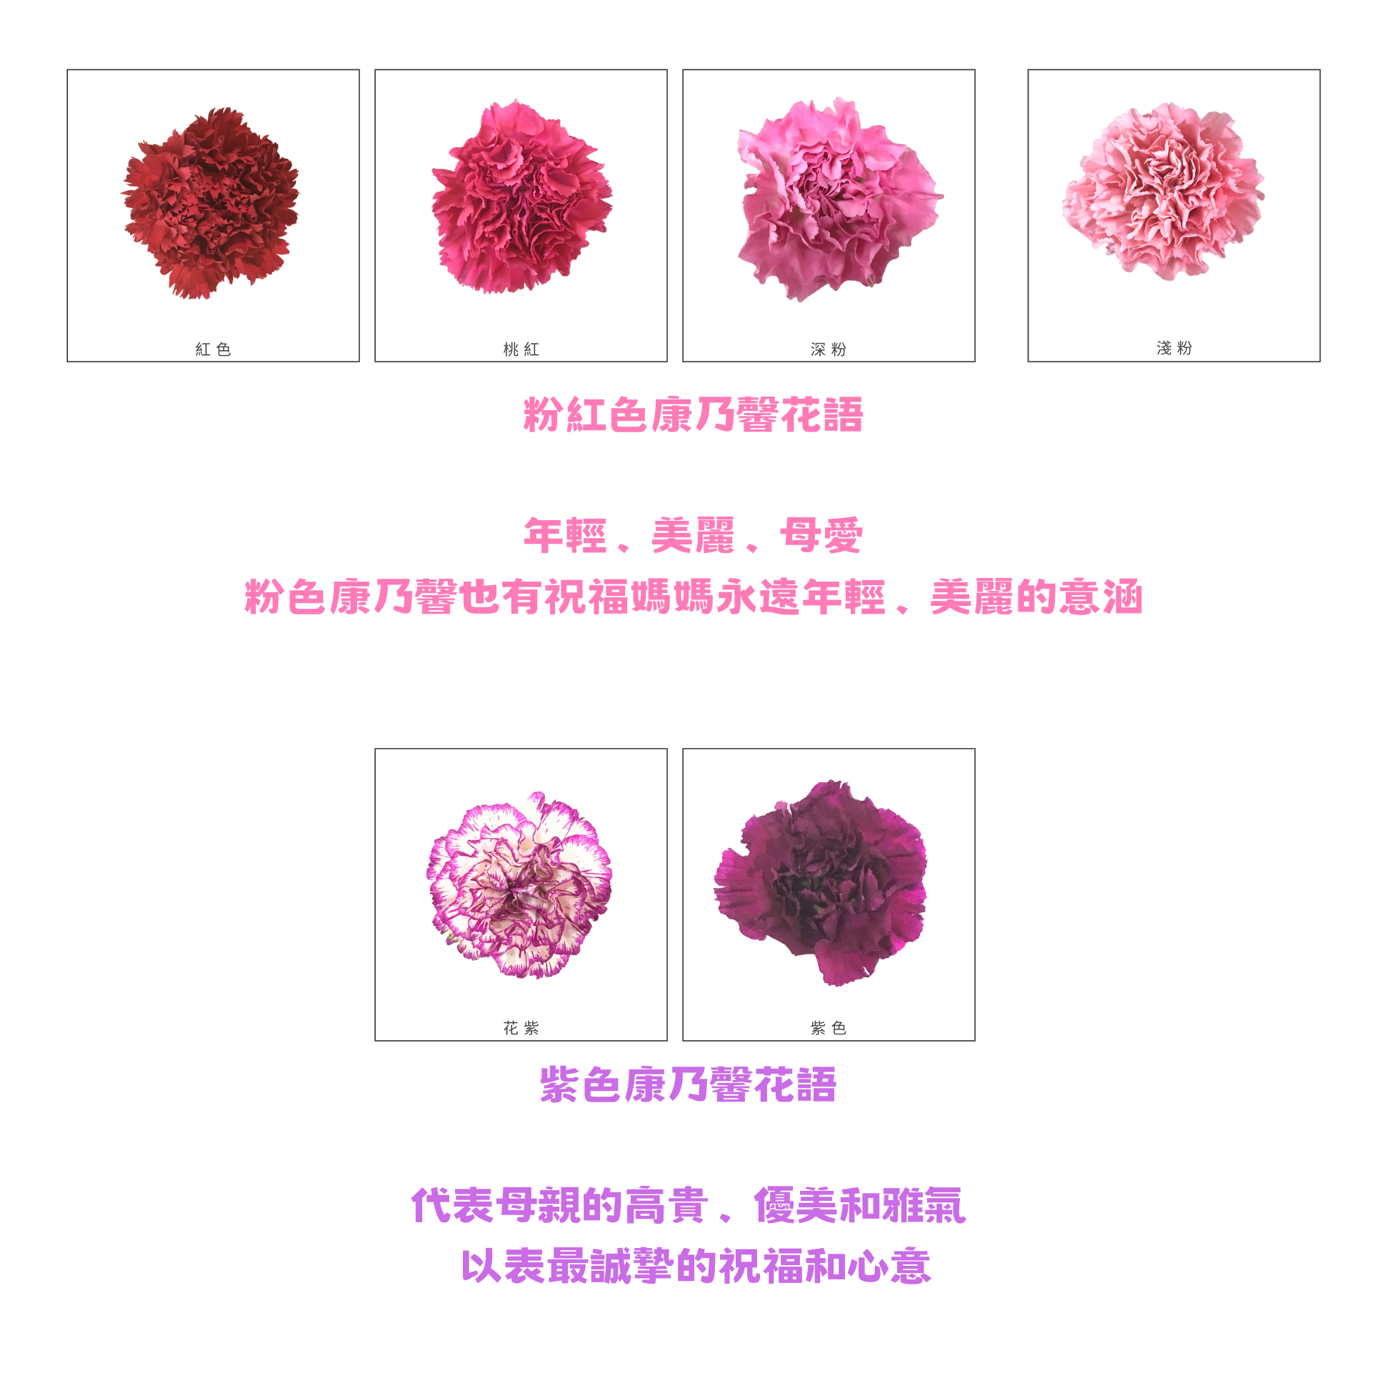 A picture containing text, flower, screenshot, pink

Description automatically generated